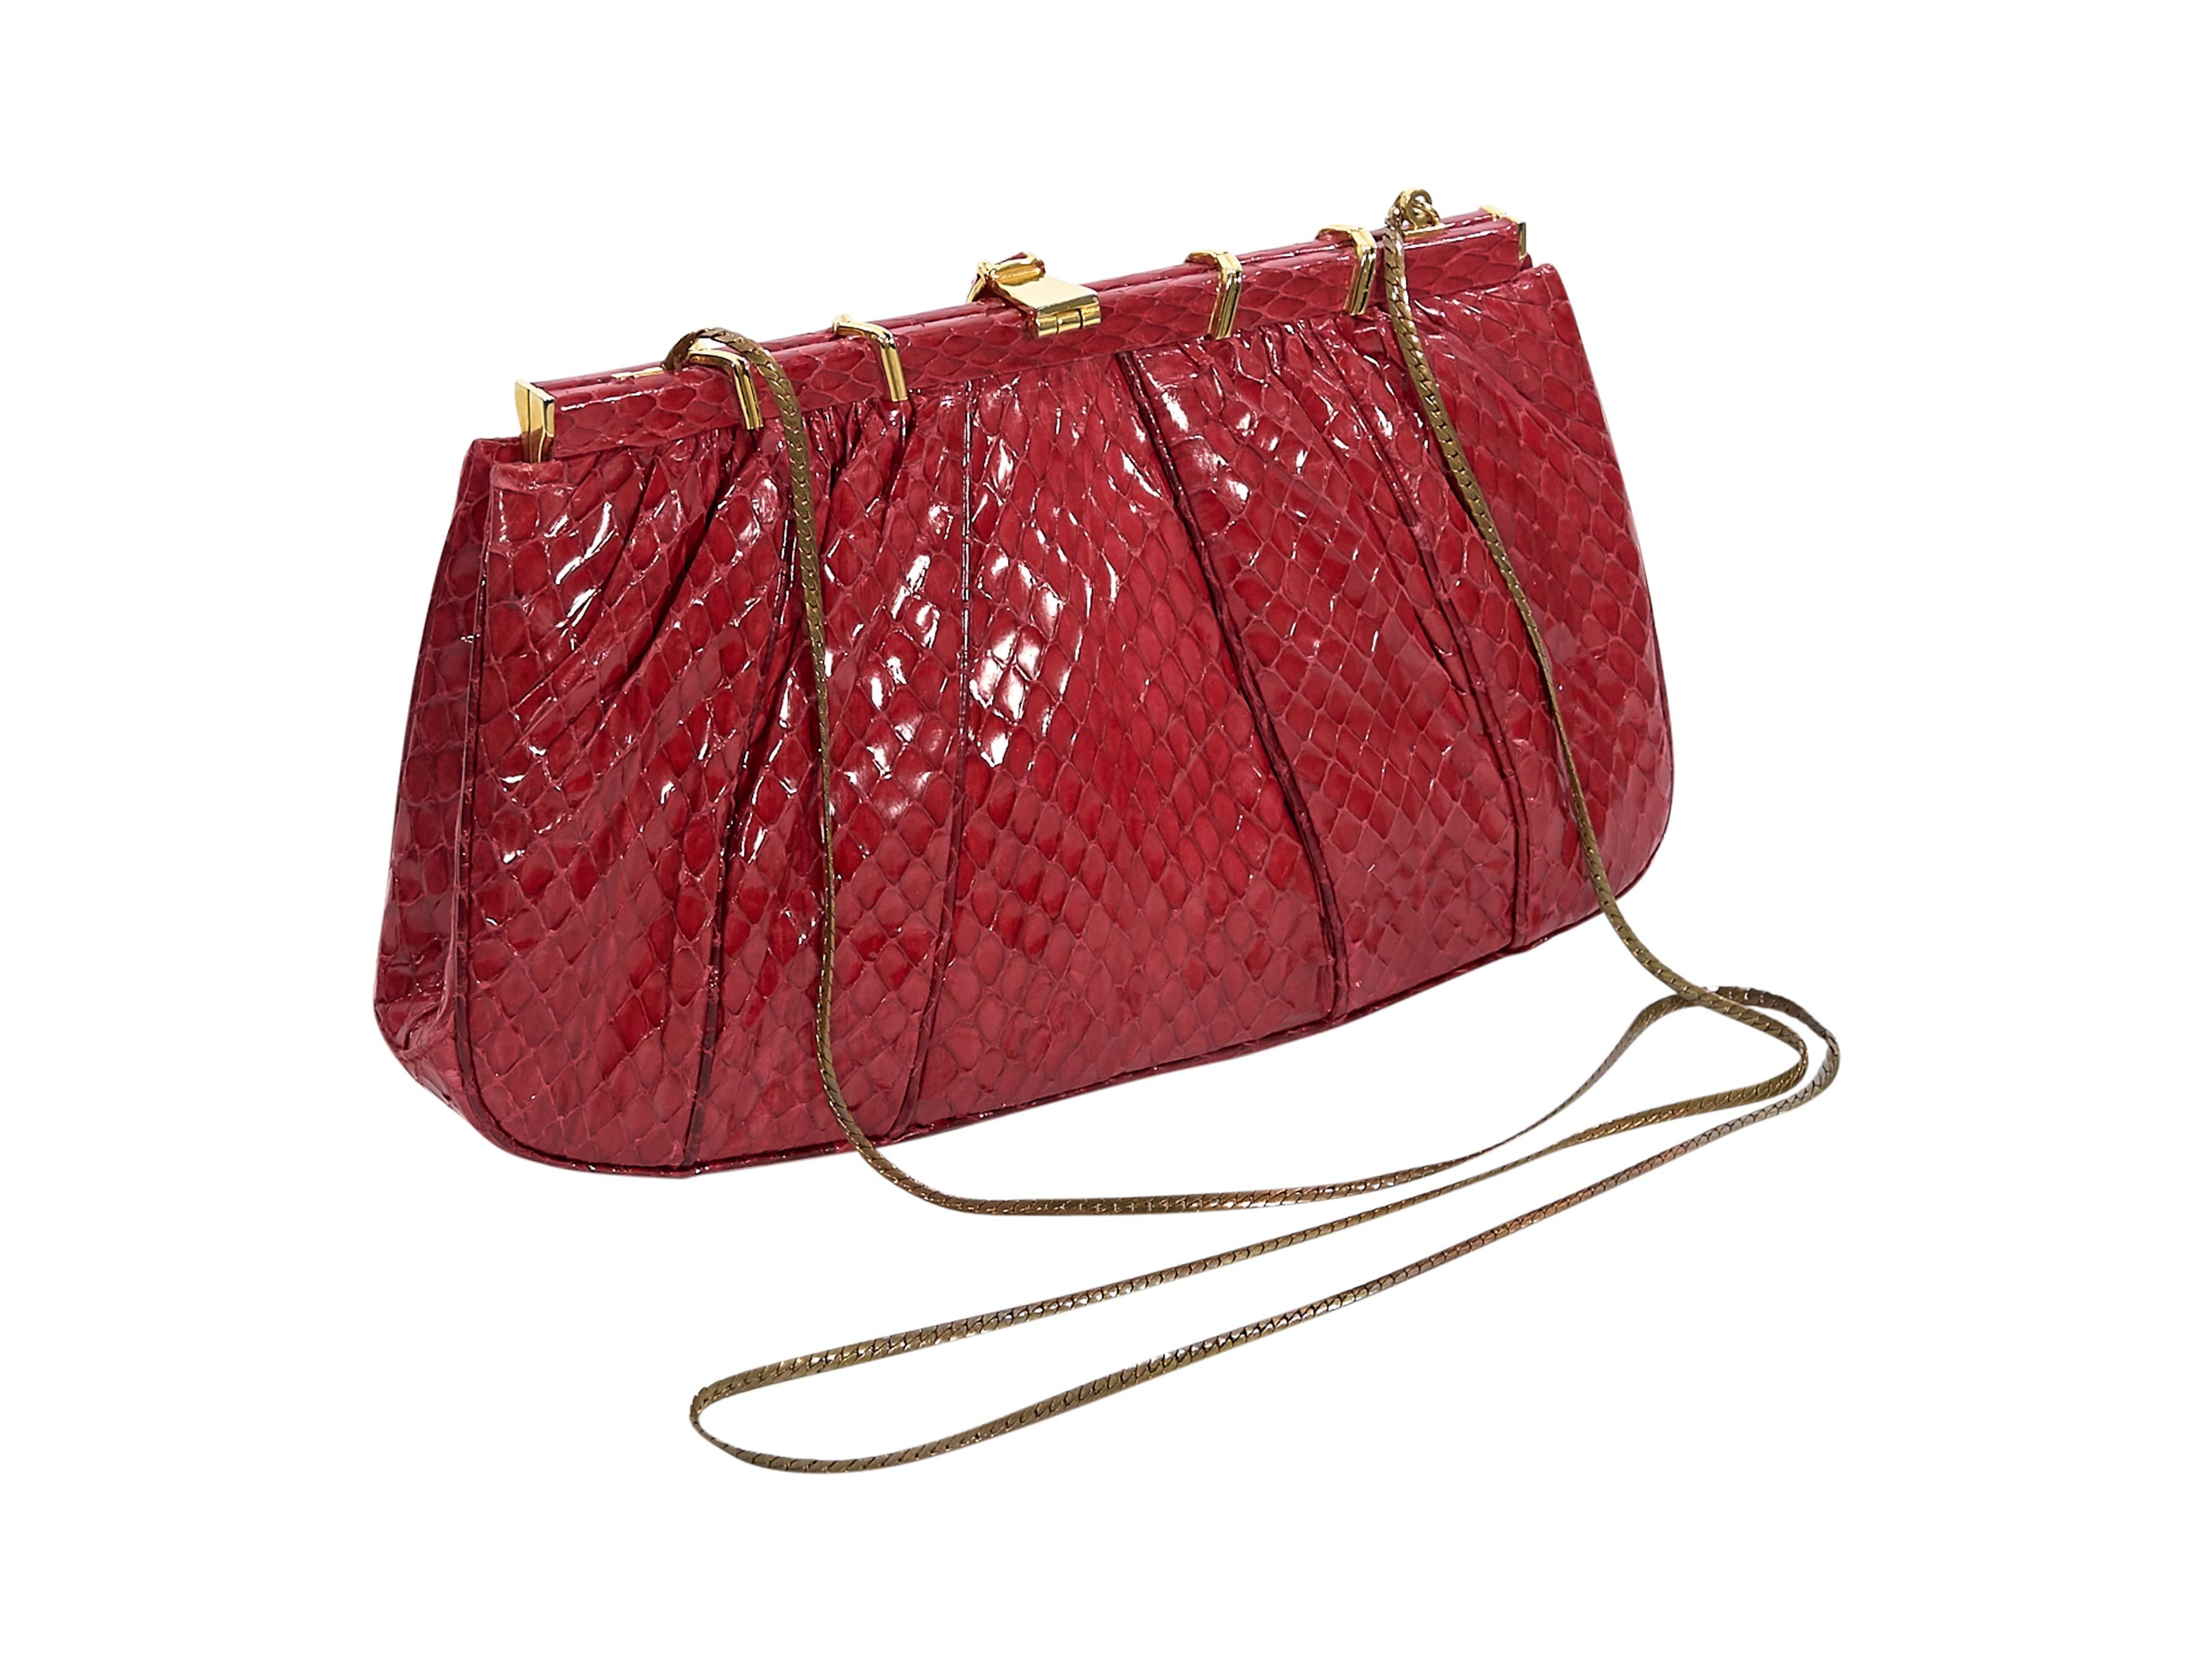 Product details:  Vintage red snakeskin clutch by Judith Leiber.  Tuck-away chain shoulder strap.  Top flip-lock closure.  Lined interior with inner zip pocket.  Goldtone hardware.  9